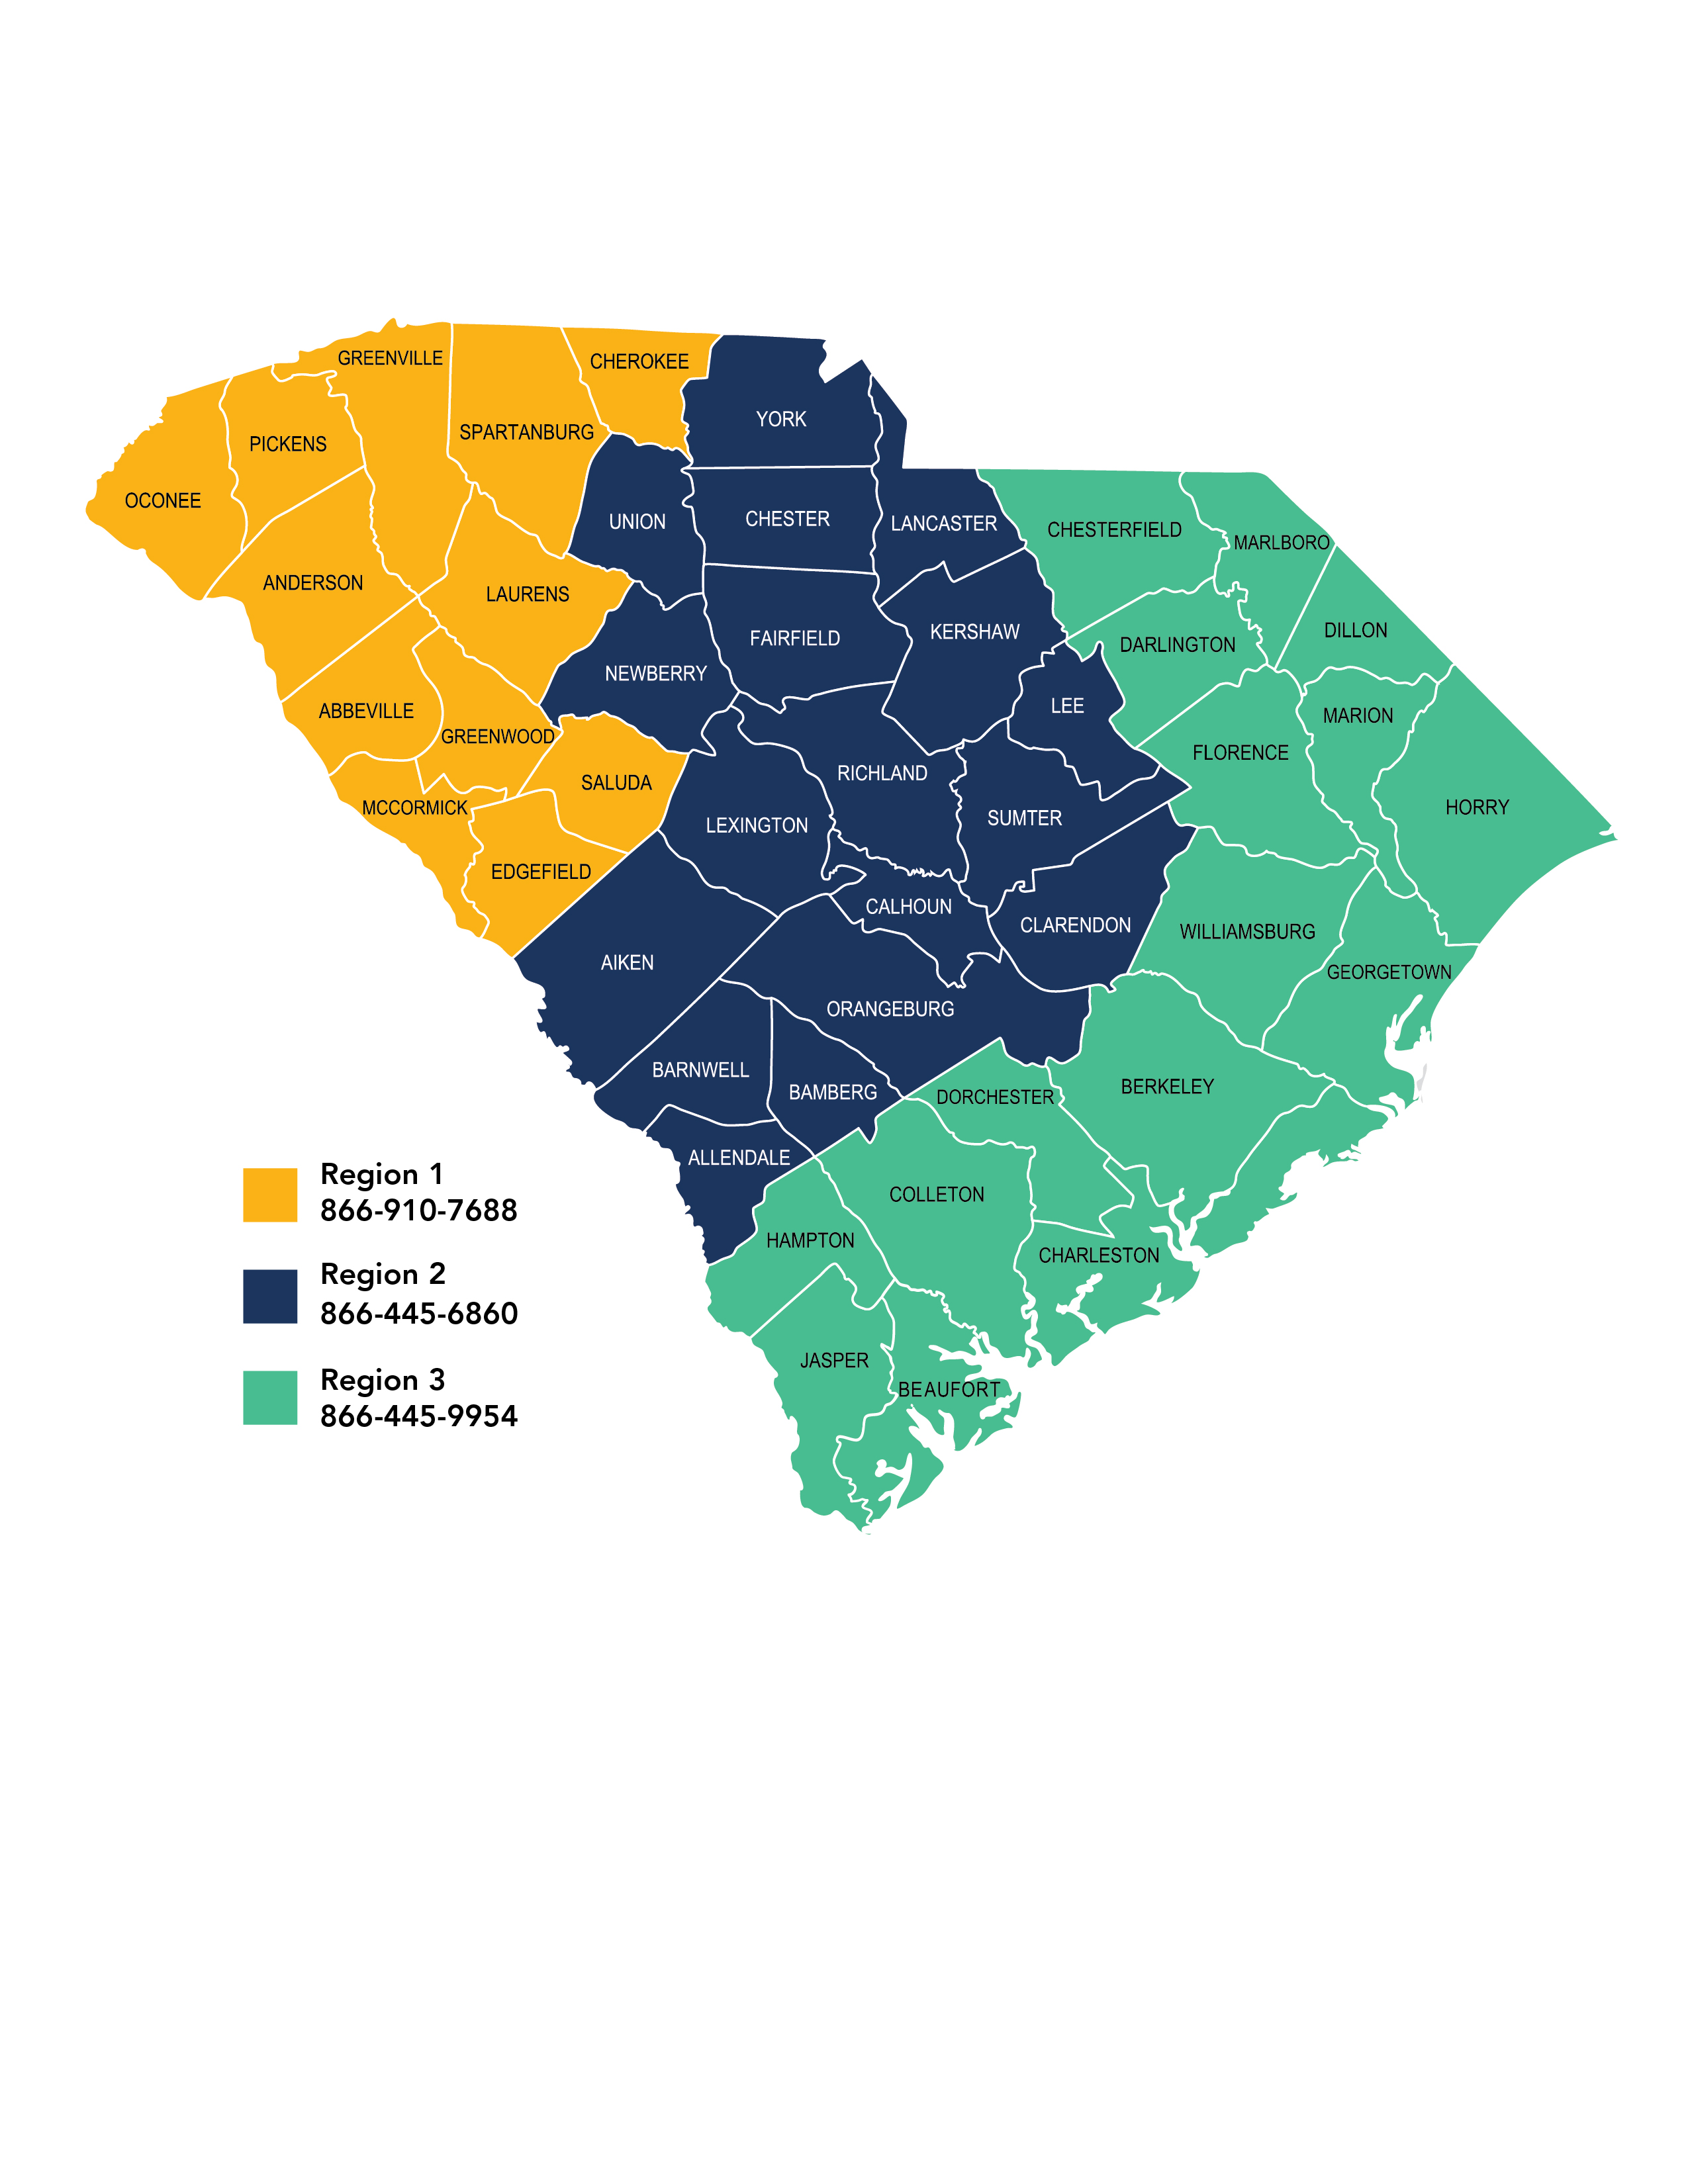 Map of South Carolina color coded for three regions